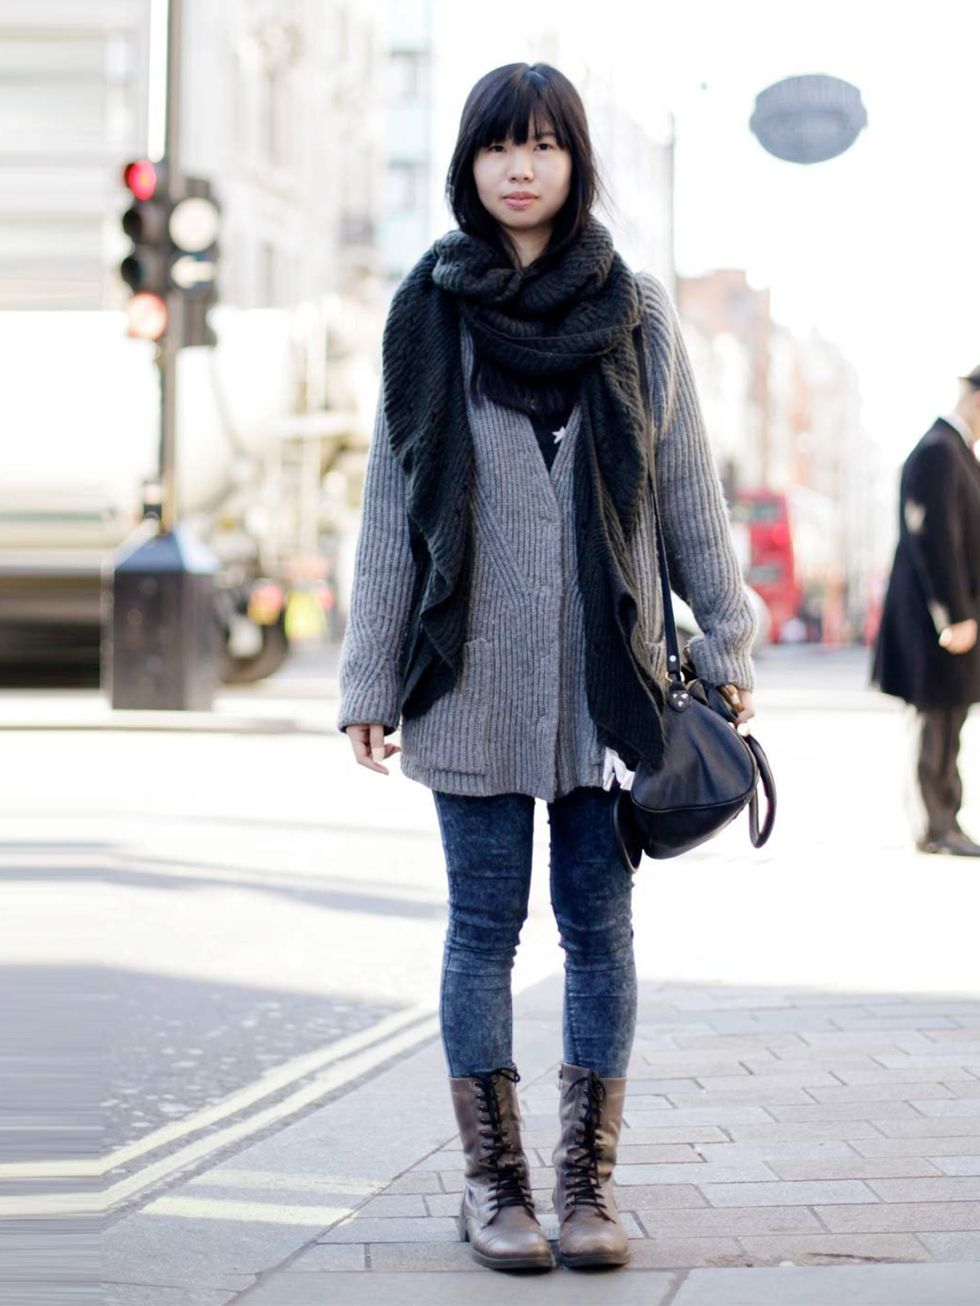 <p>May, 24, Student. Zara jumper and scarf, Topshop jeans, River Island bag.</p>